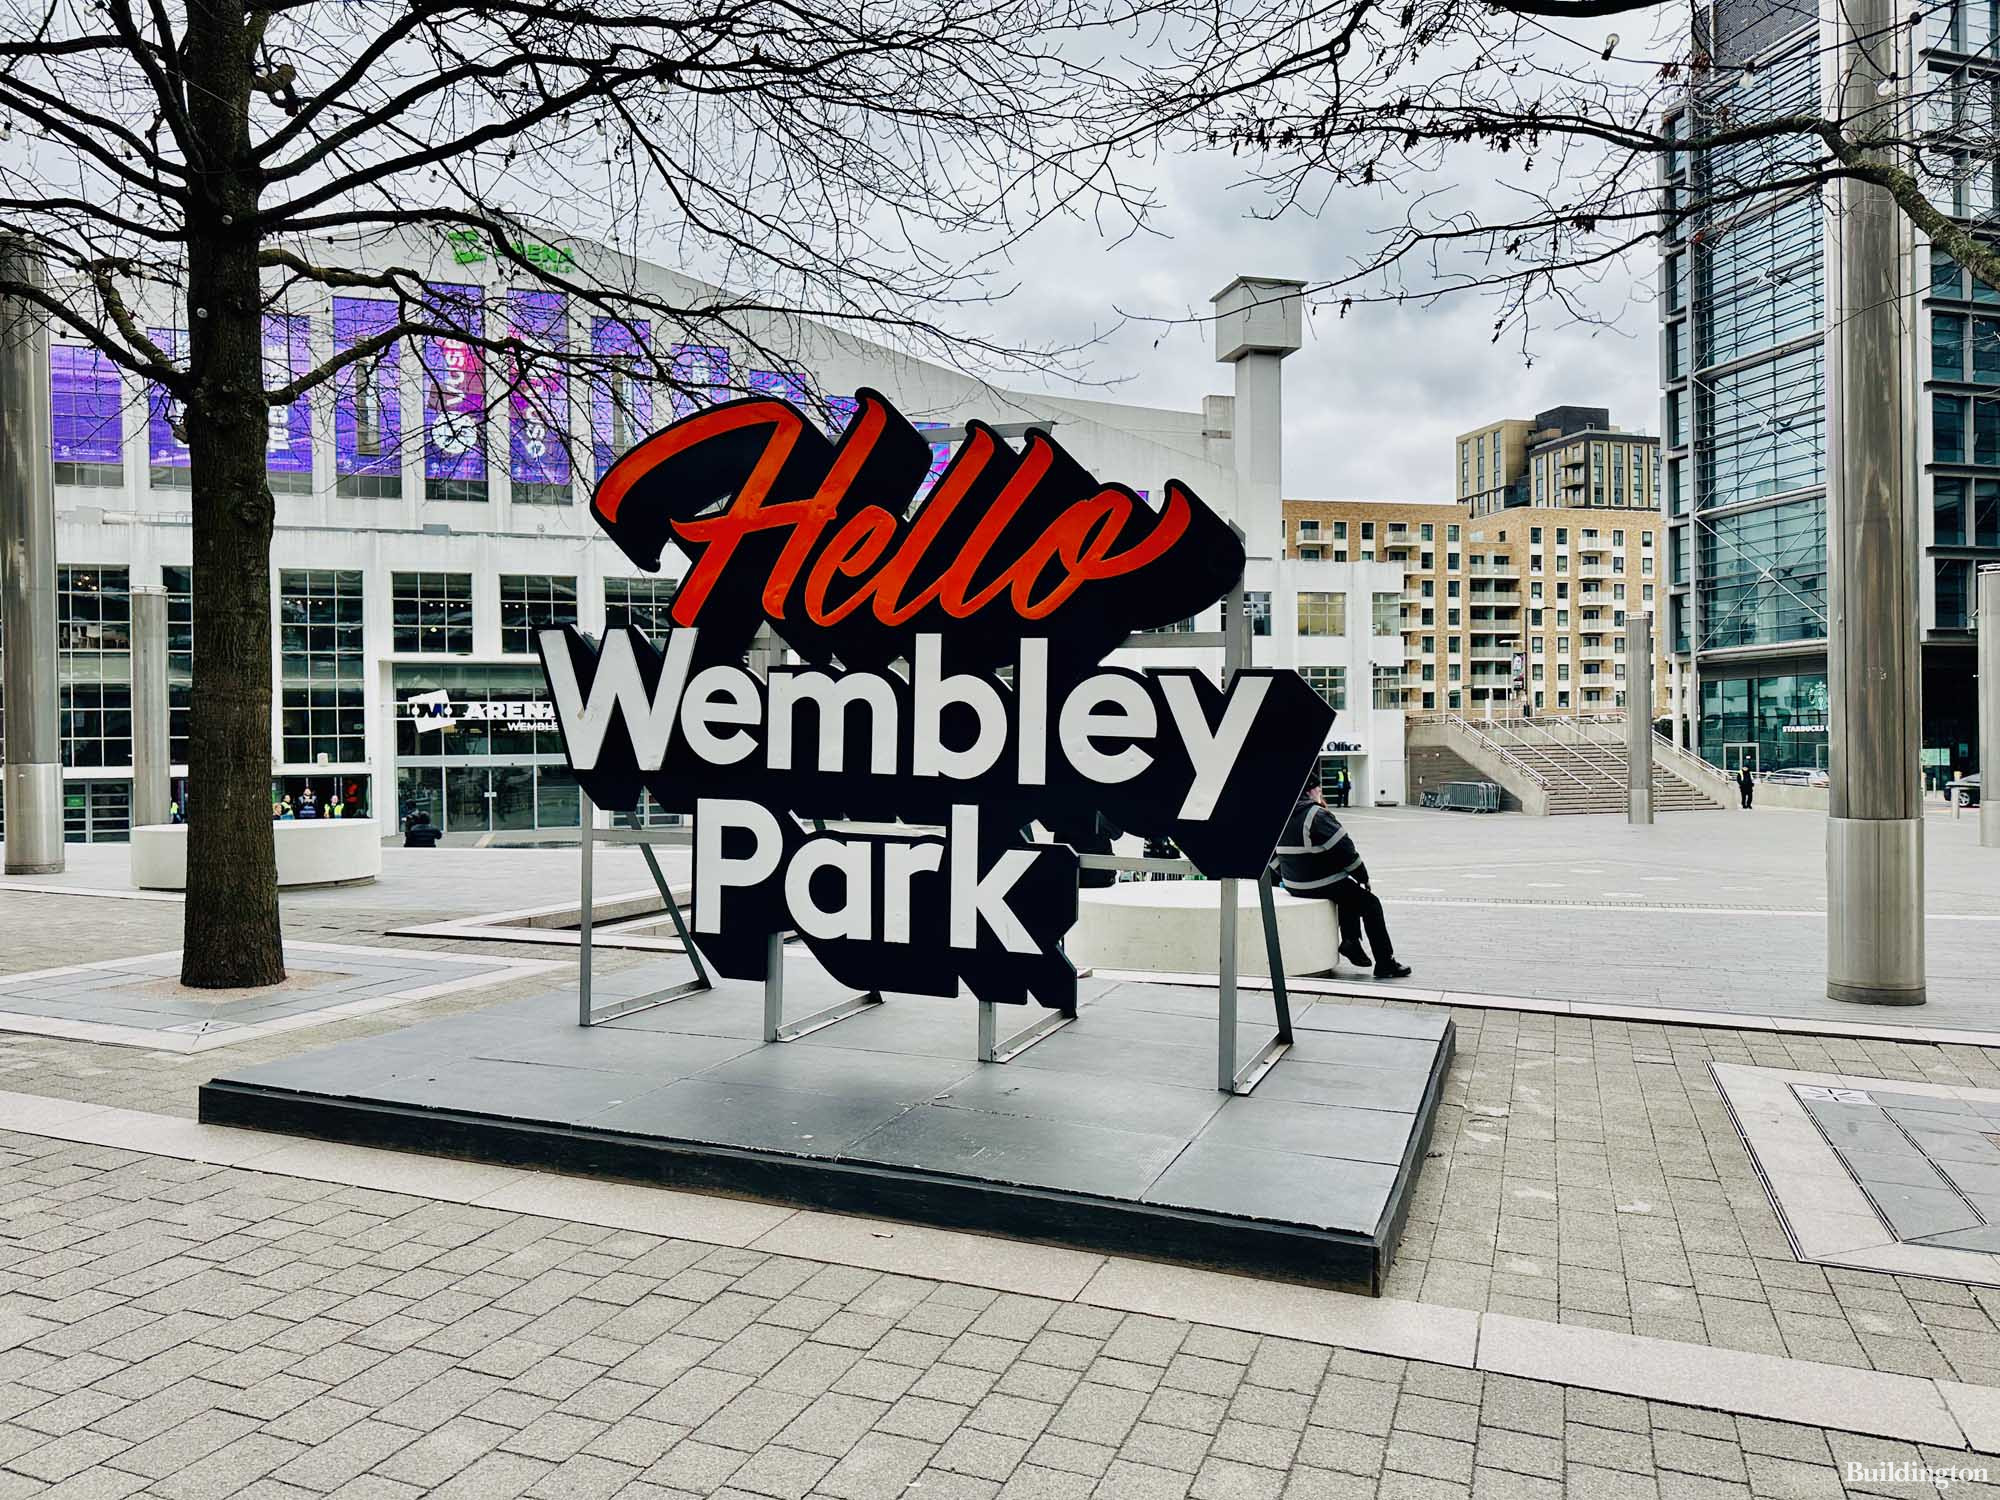 Welcome to Wembley Park